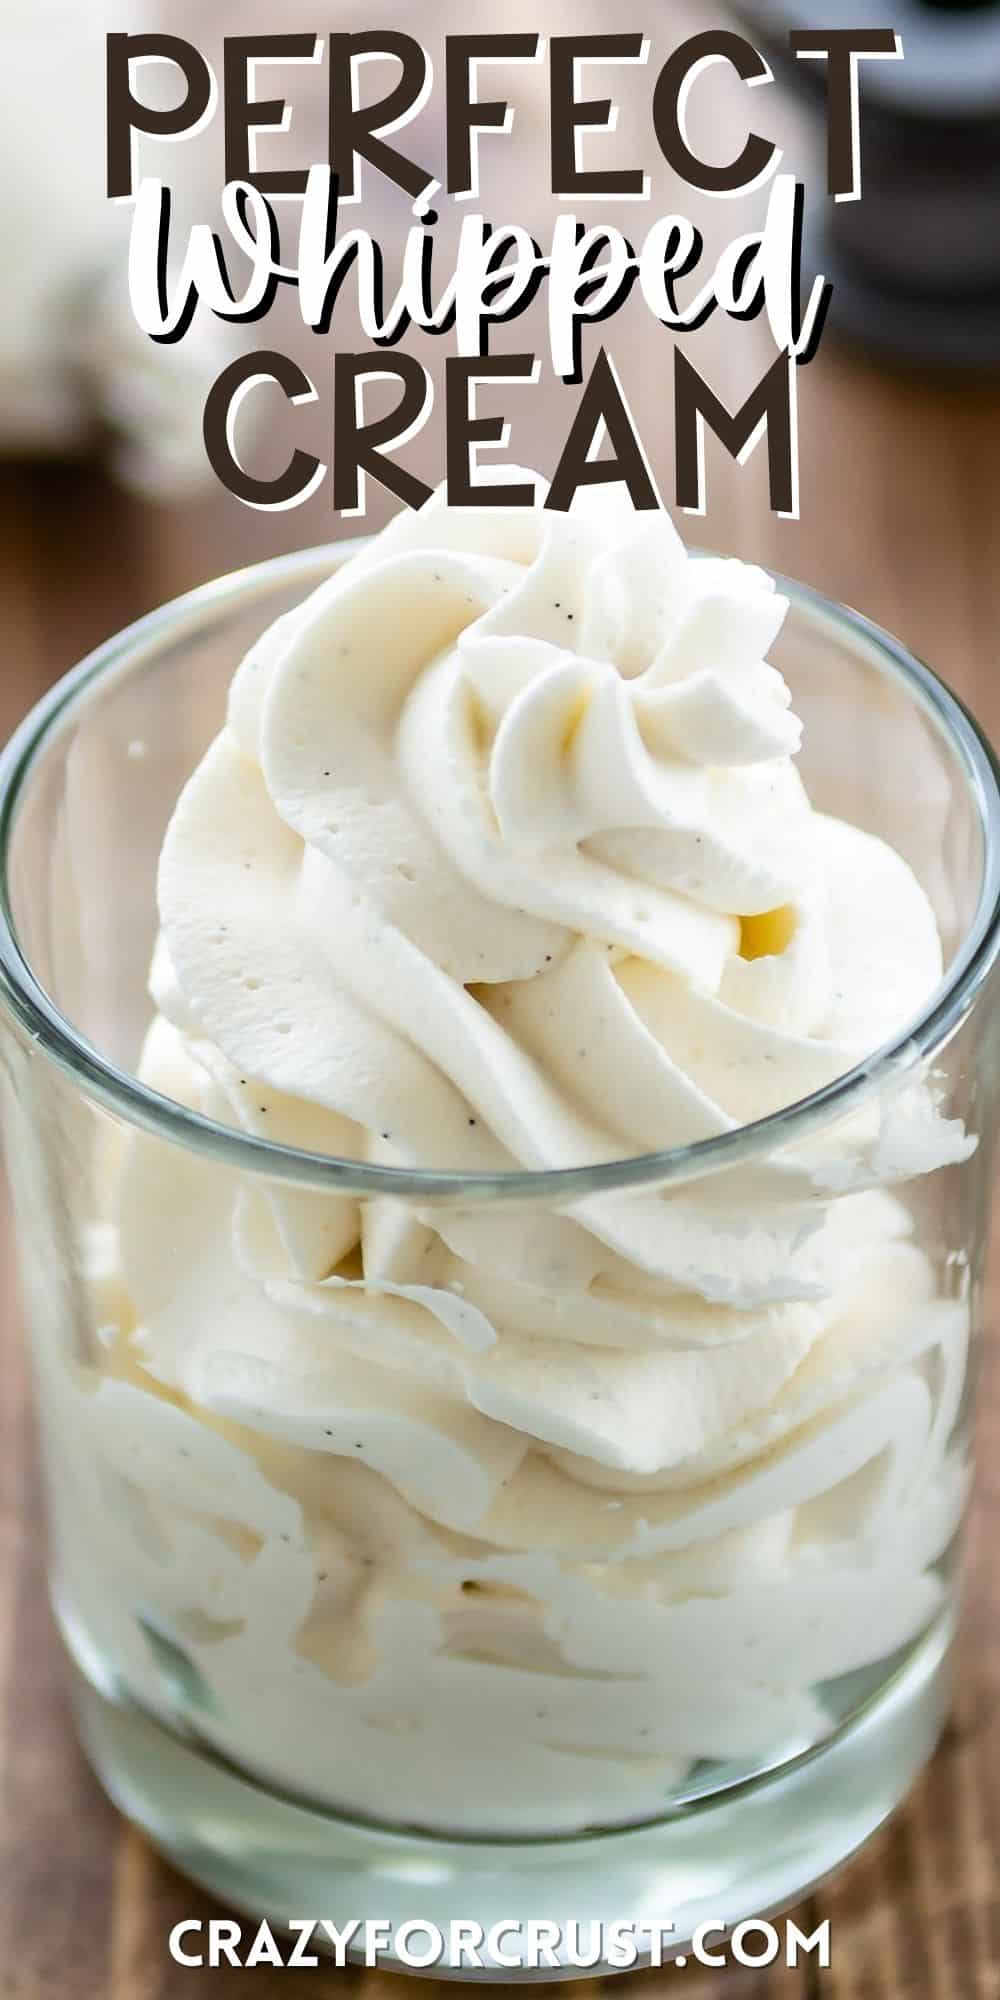 whipped cream in a clear jar with words on the image.